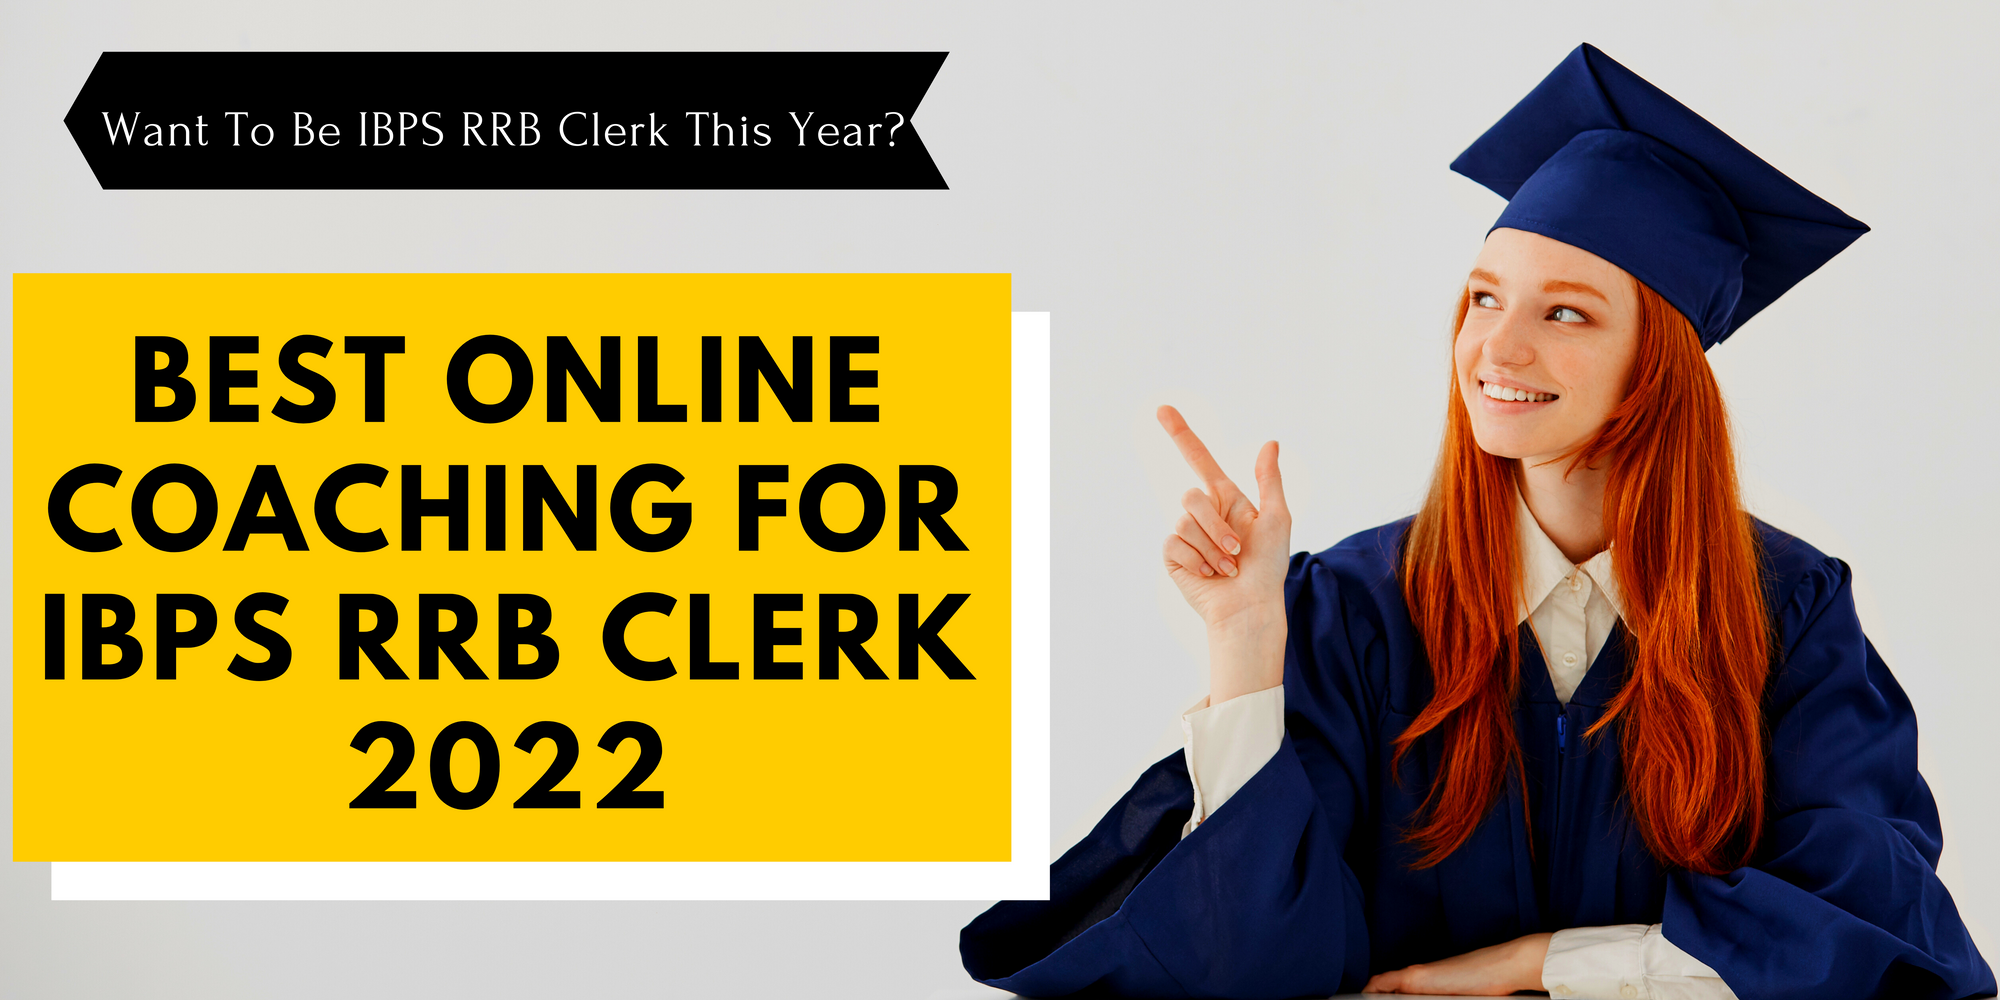 Best Online Coaching for IBPS RRB Clerk 2022